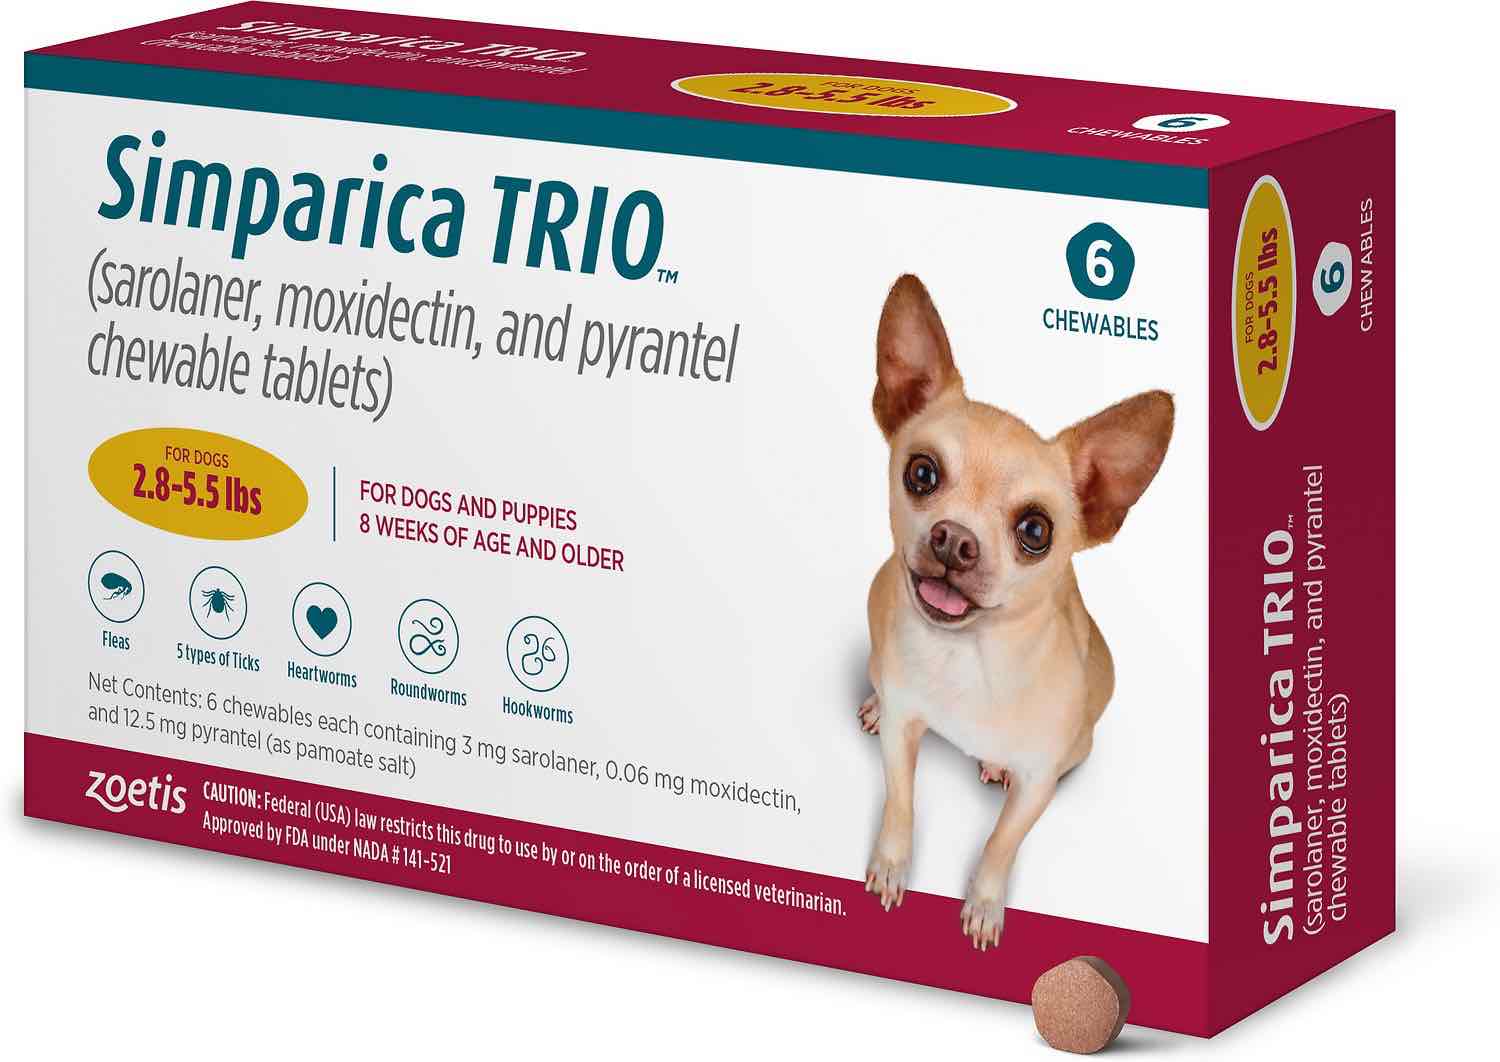 Simparica Trio 6 chewable tablets for dogs 2.8-5.5 lbs (Gold) 1